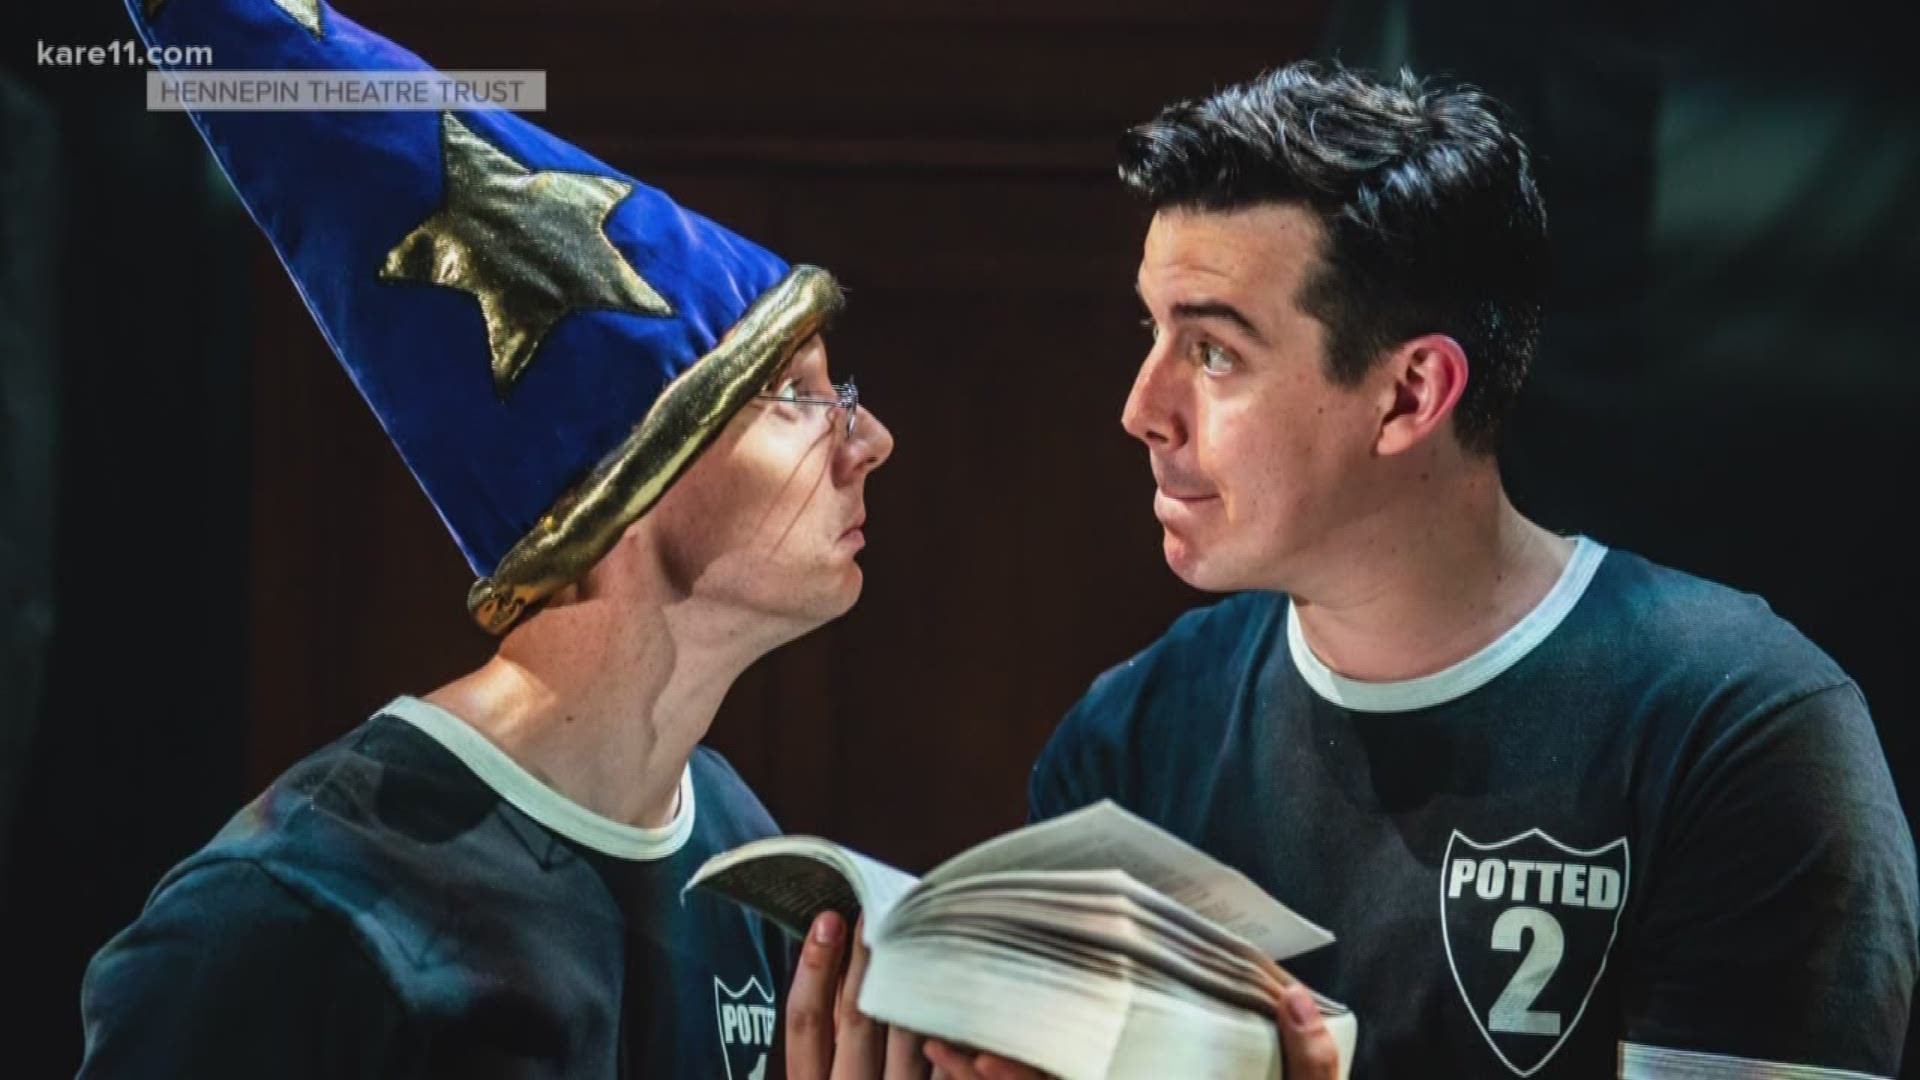 POTTED POTTER is a family-friendly show that lovingly parodies Harry Potter in an energetic, fast-paced 70 minutes. https://kare11.tv/2tq1RU2